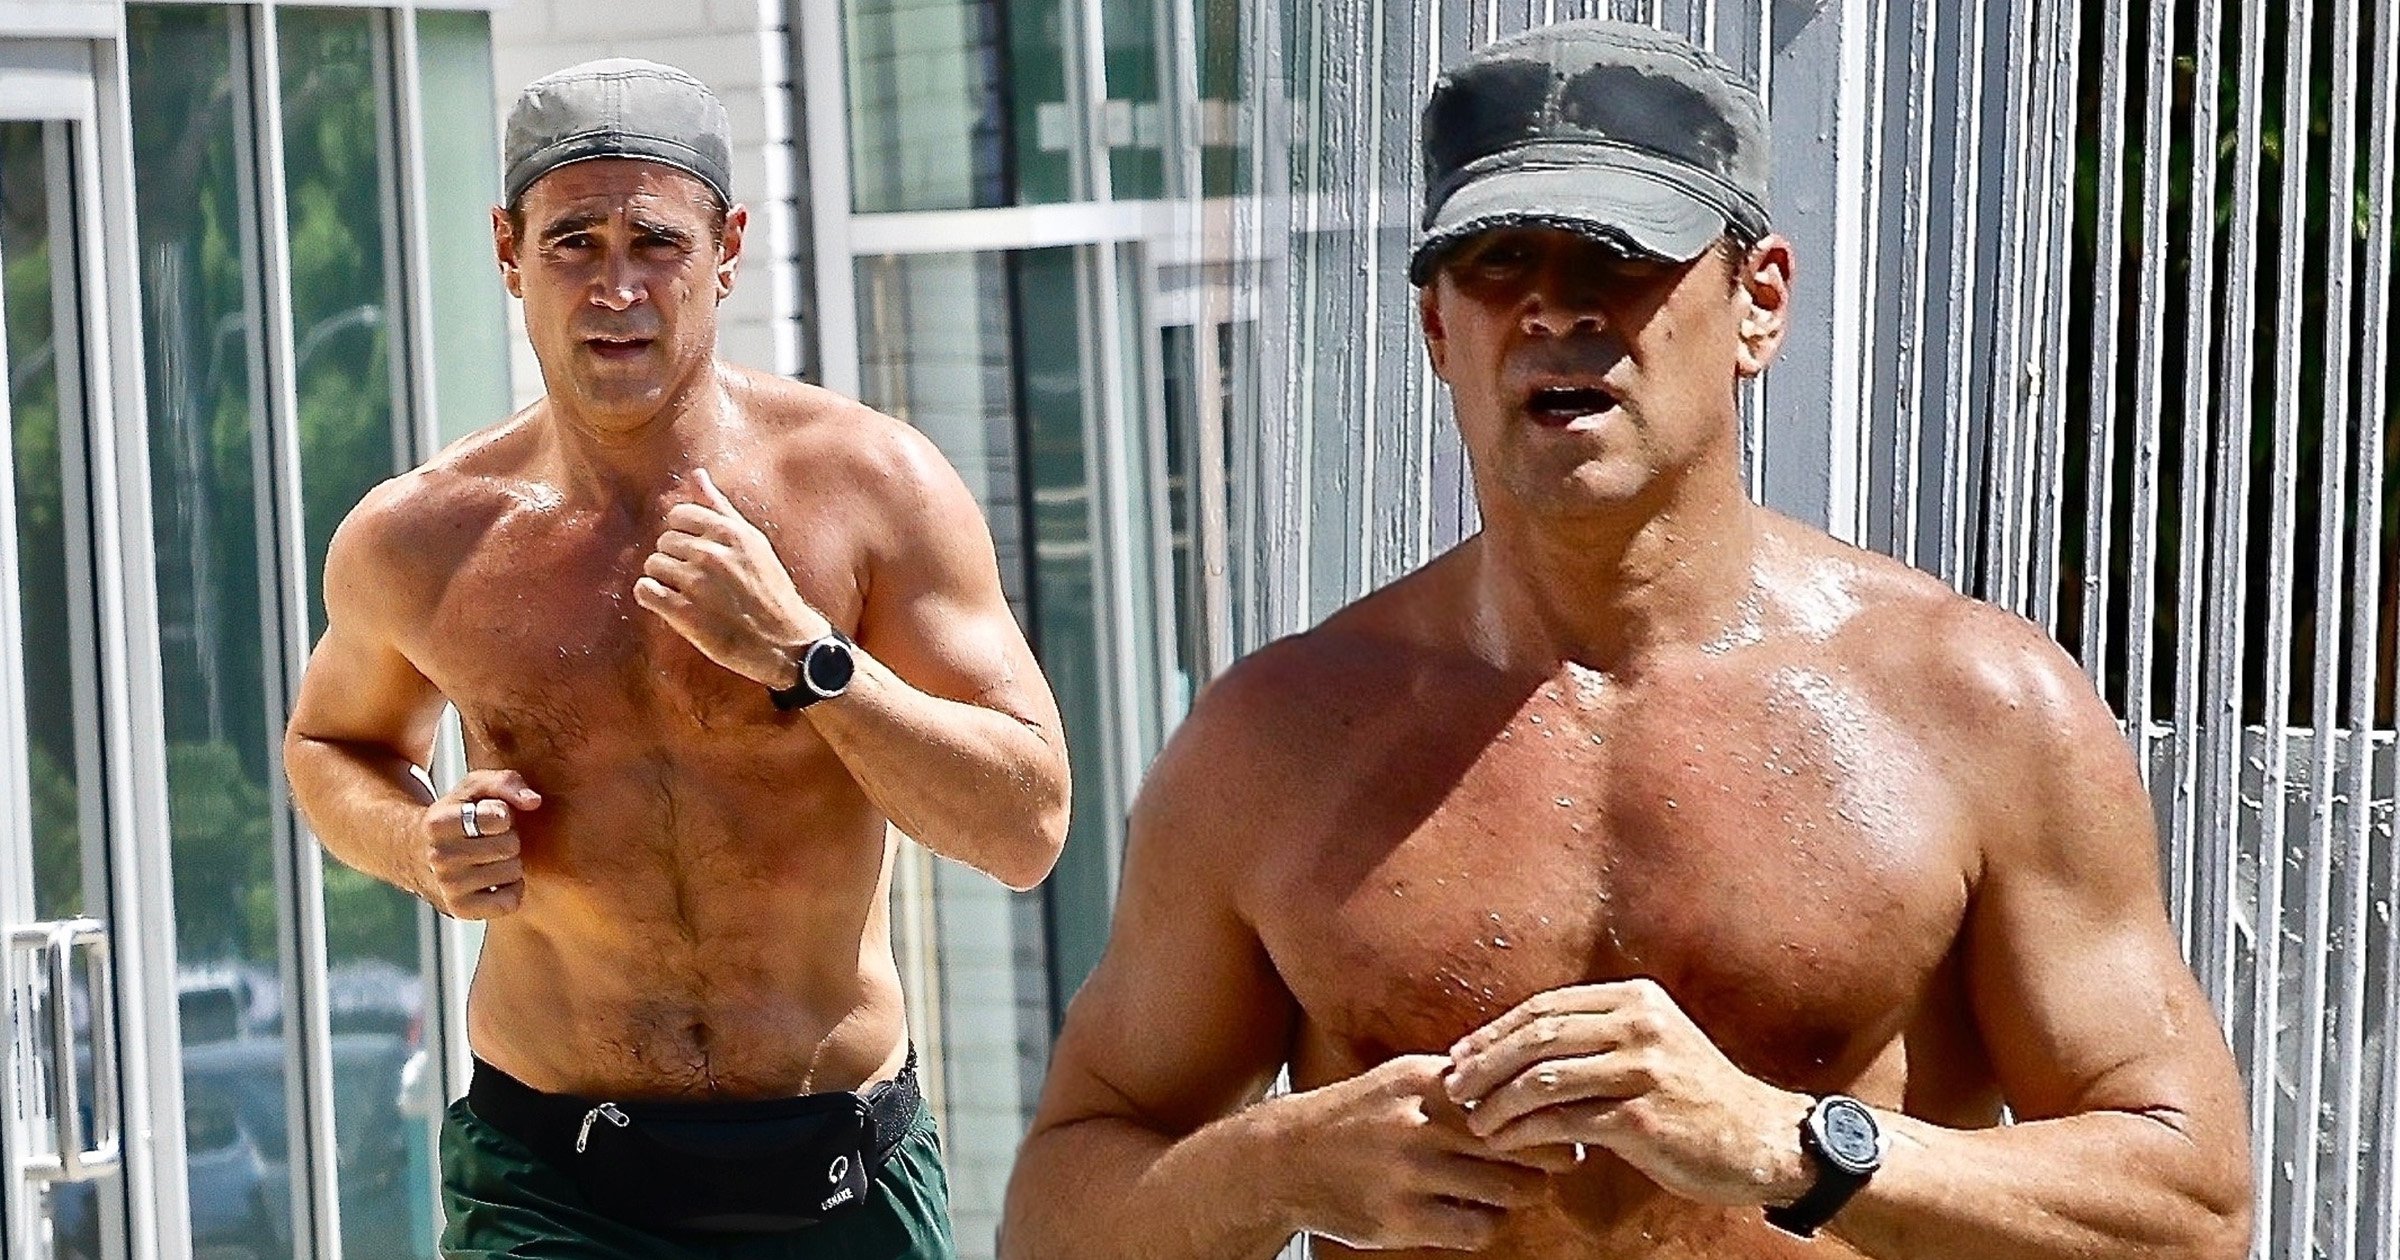 Colin Farrell goes shirtless in the sunshine for run after triumphing at Venice Film Festival